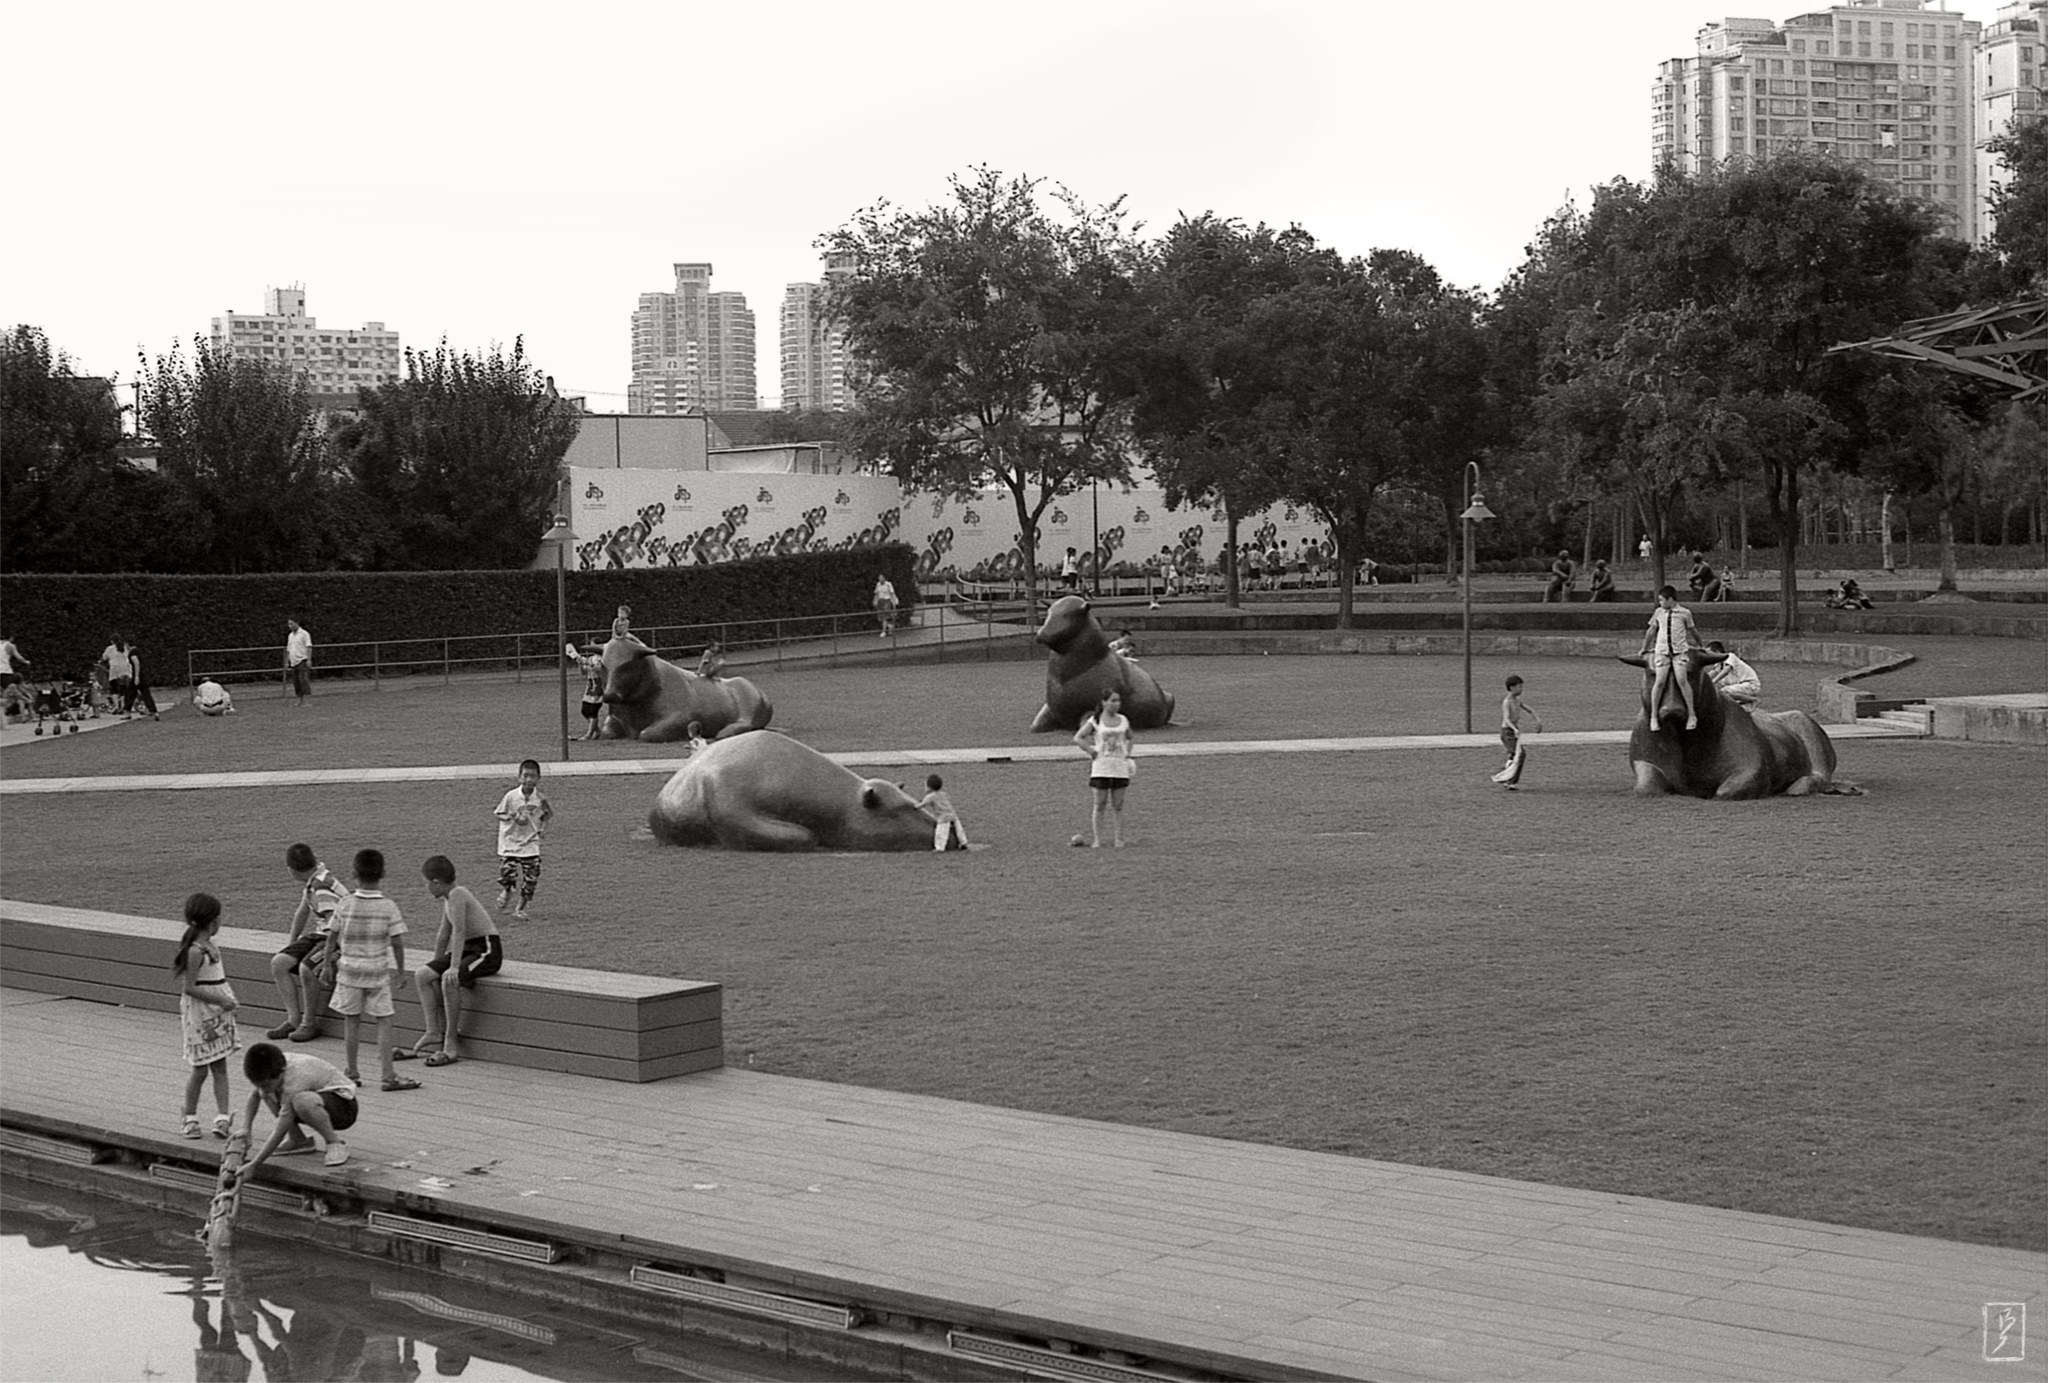 Jing'an sculpture park (静安雕塑公园): Children at play. Every five minutes or so, a guard would appear and yell at them to get off the statues.